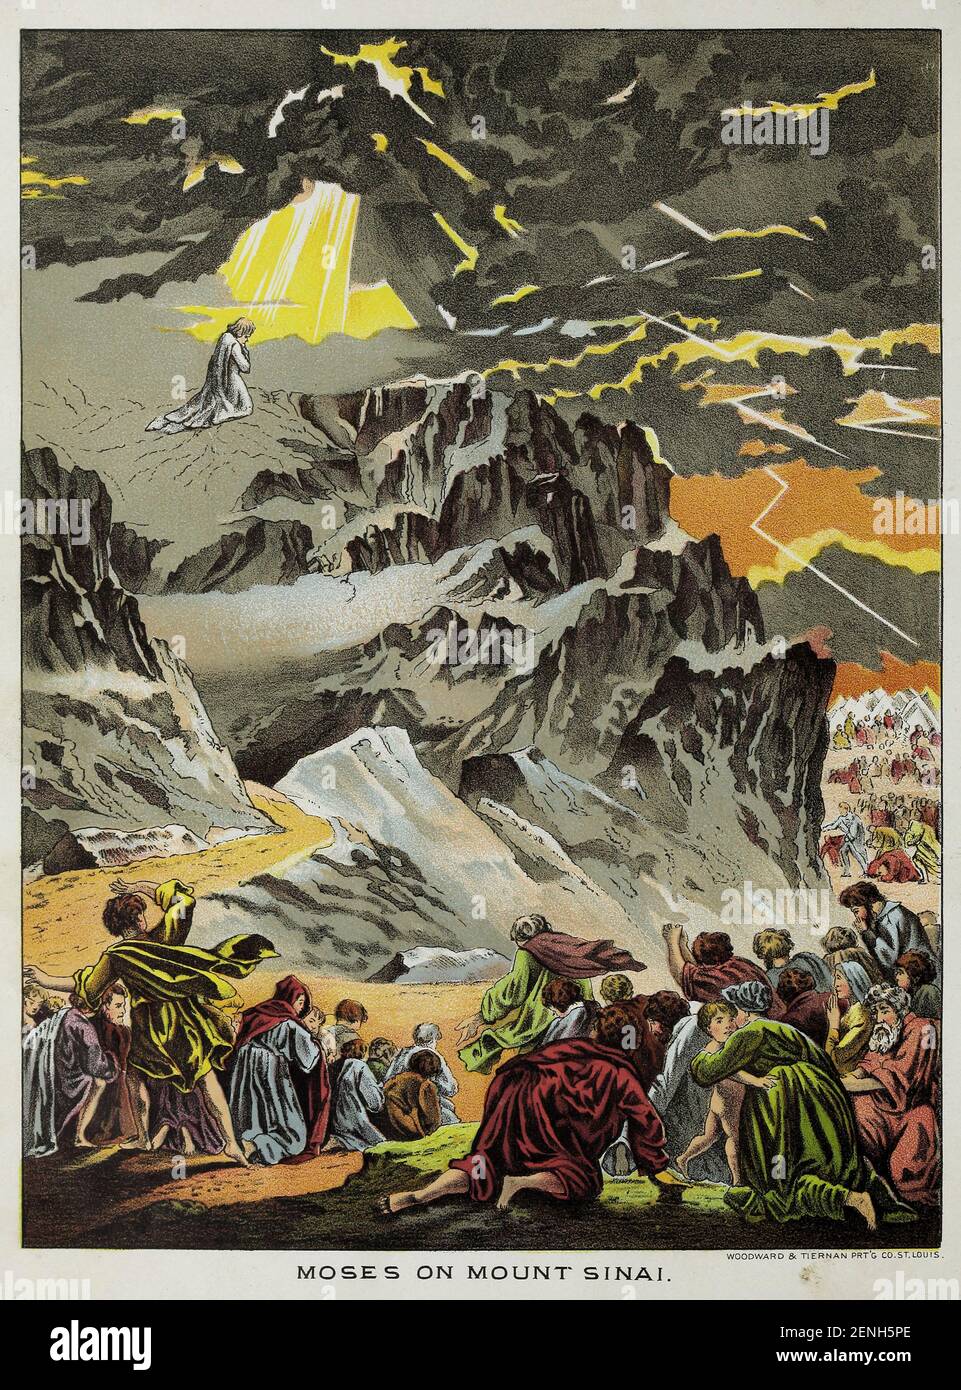 Moses on Mount Sinai From the book ' Young folks' Bible in words of easy reading : the sweet stories of God's word in the language of childhood and in the beautiful delineations of Christian art, the whole designed to impres the mind and heart of the youngest readers, and kindle a genuine love for the book of books ' by Pollard, Josephine, 1834-1892 Published in Chicago in 1889 Stock Photo